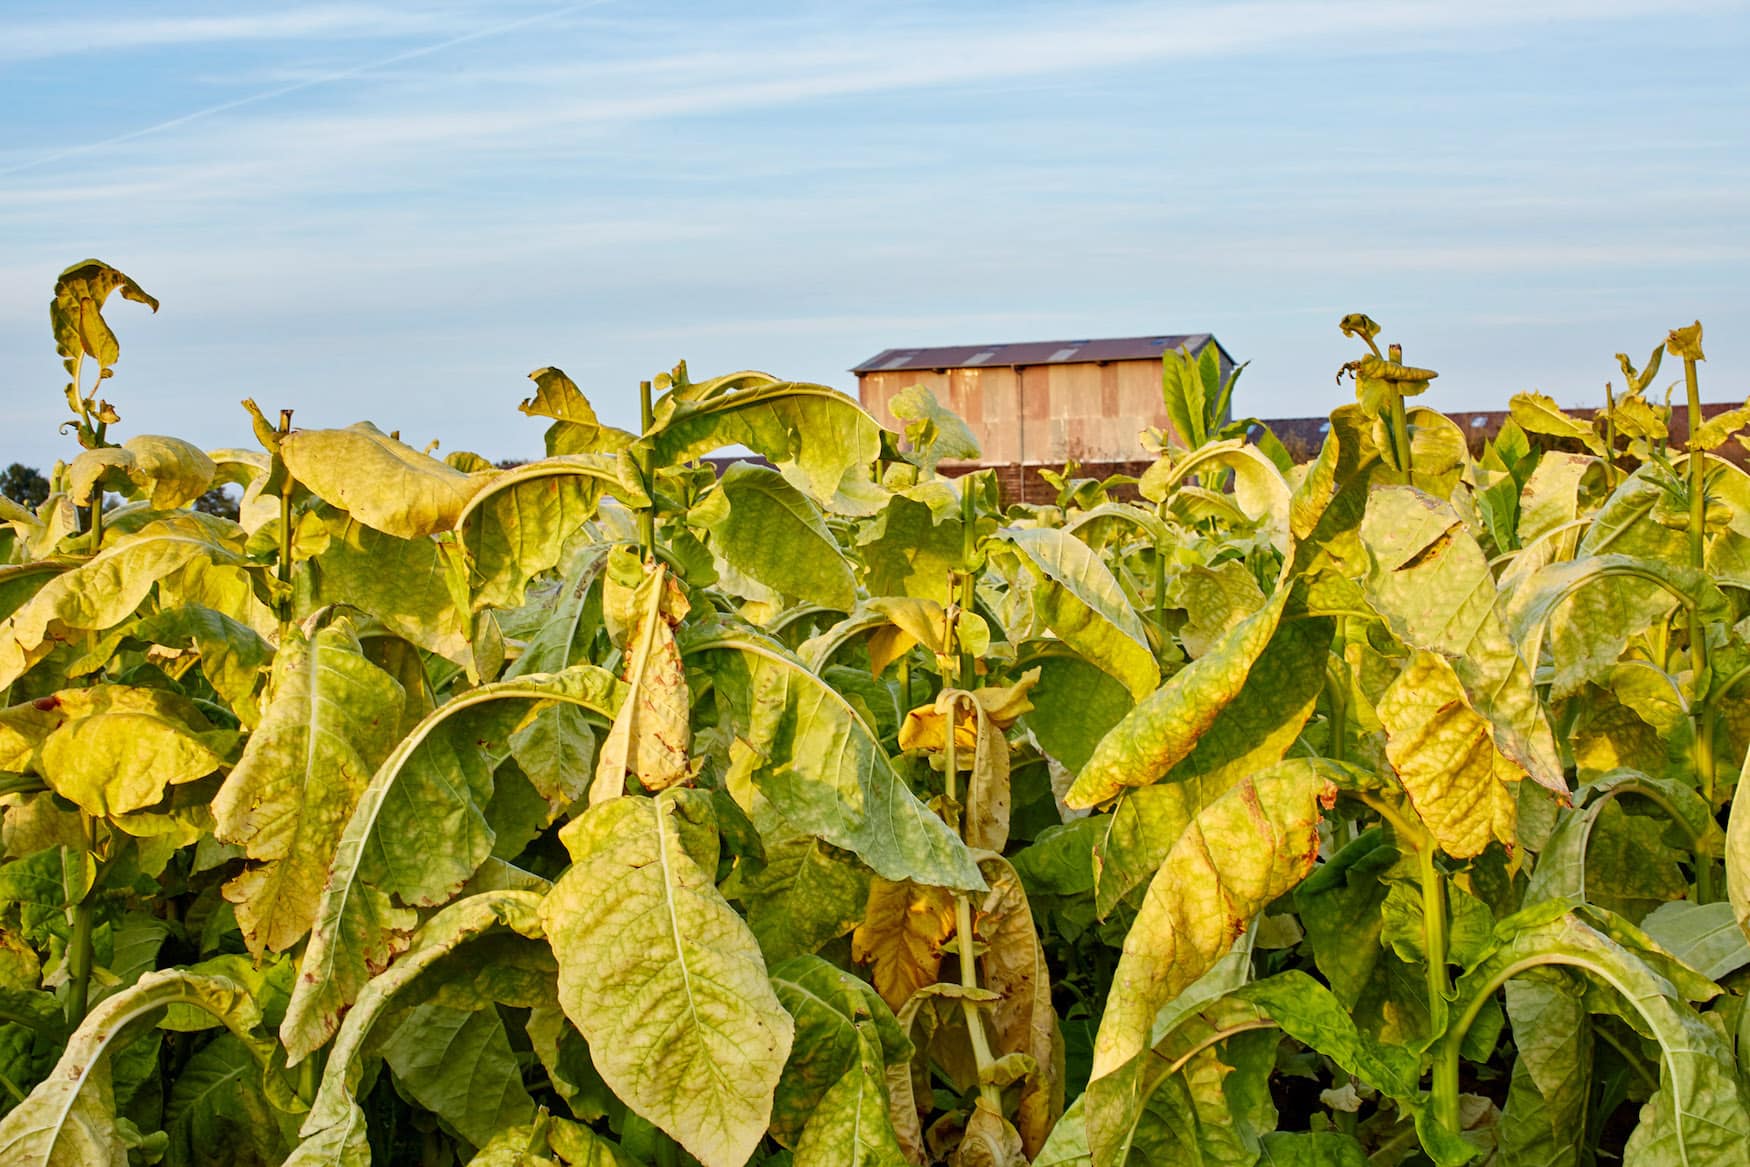 One of the largest tobacco growing areas in Germany is in Rhineland-Palatinate